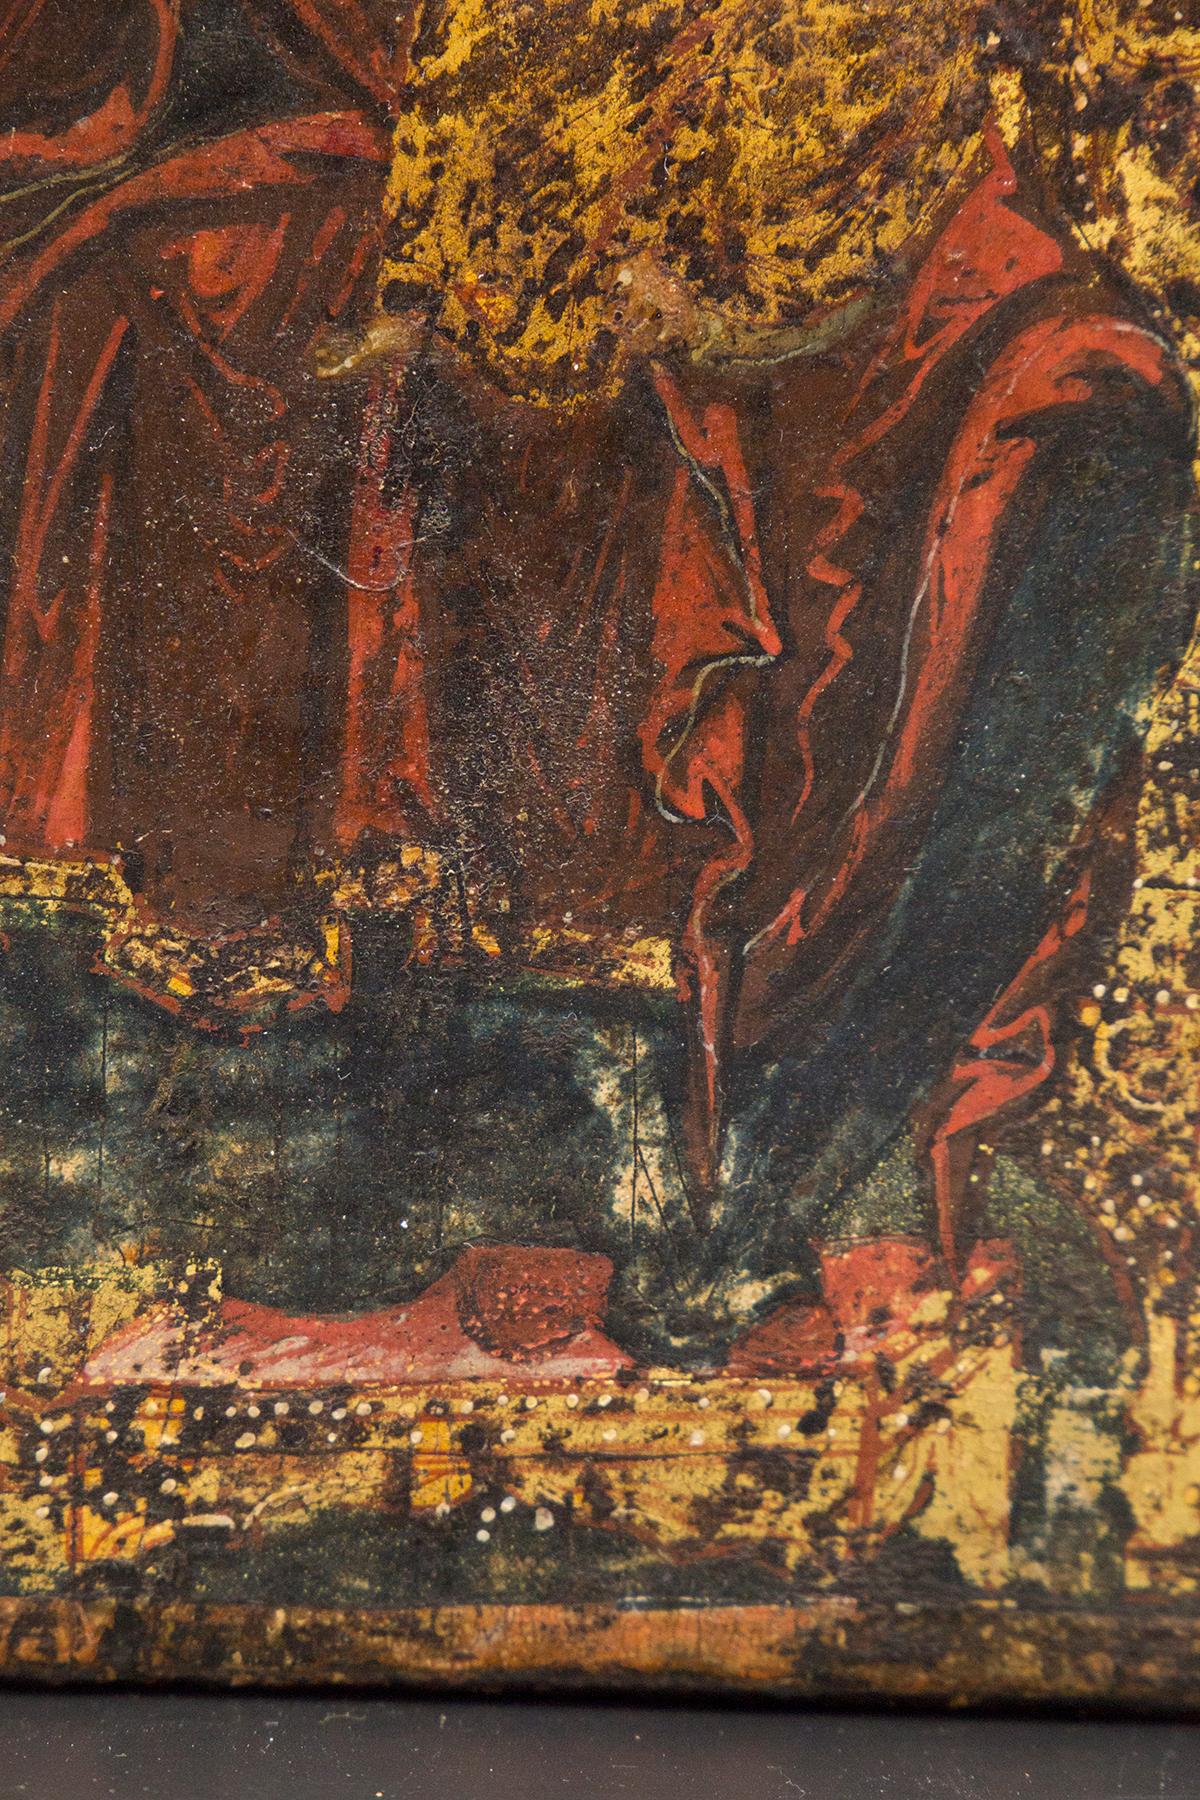 oldest icon of mary